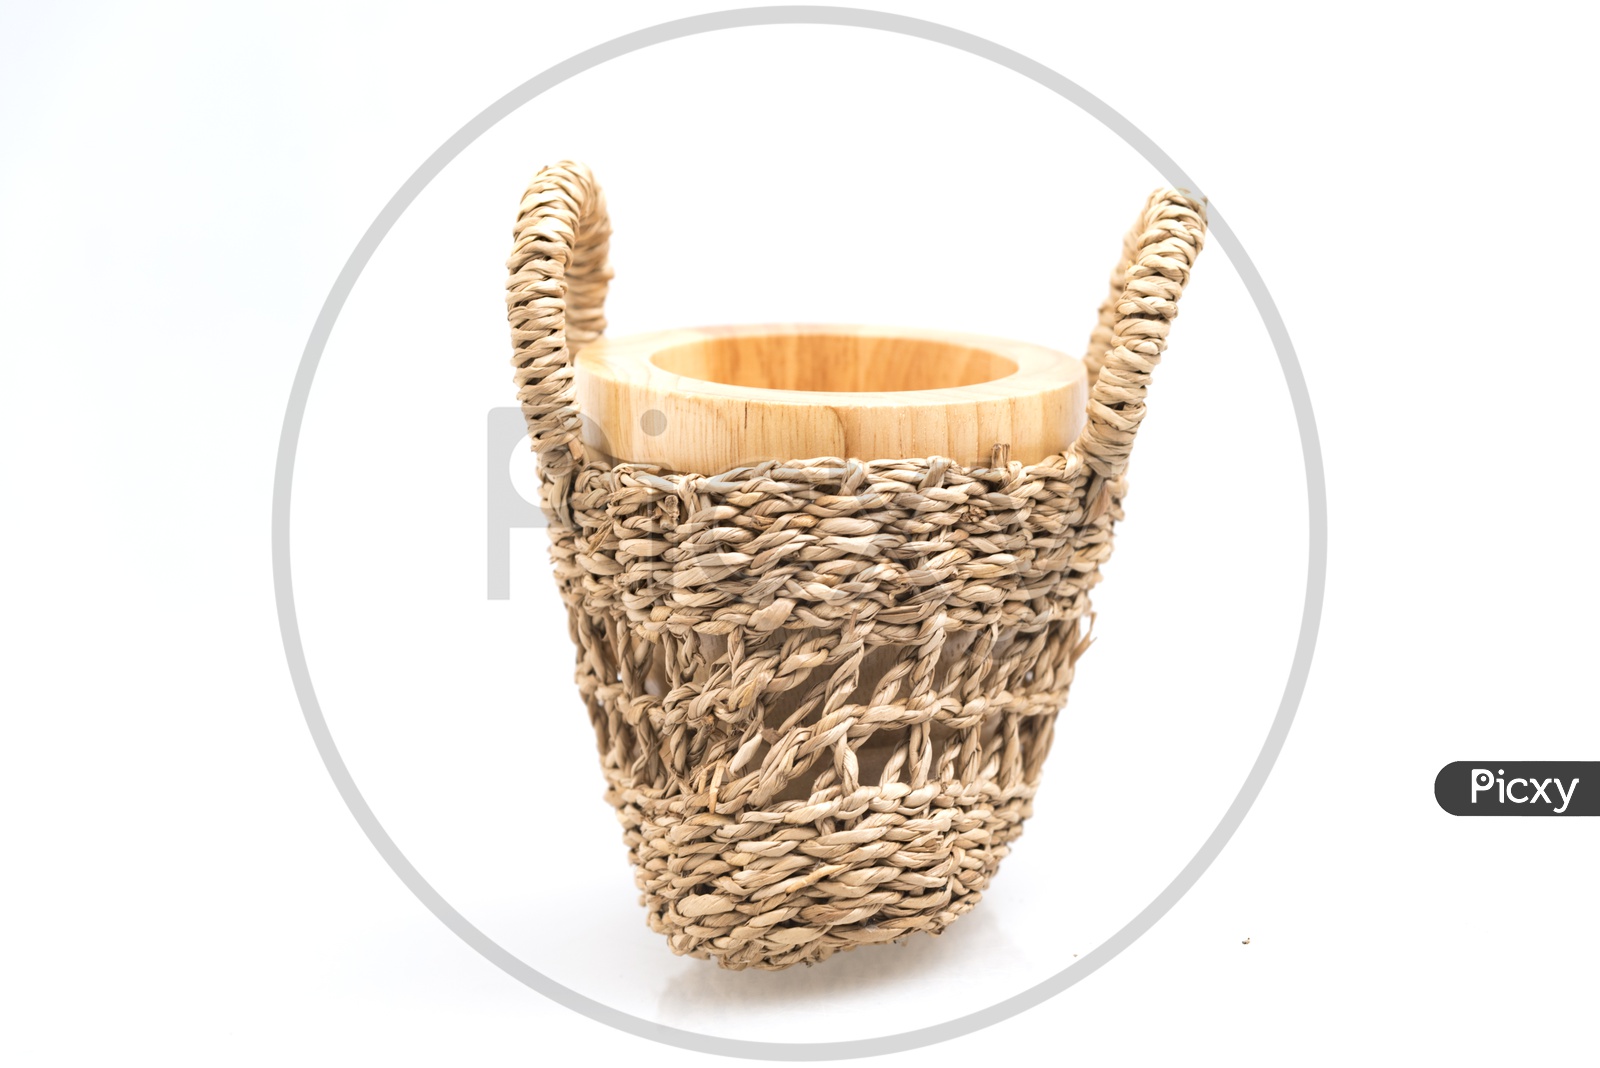 Wooden Carved Container in a Weaved Bag